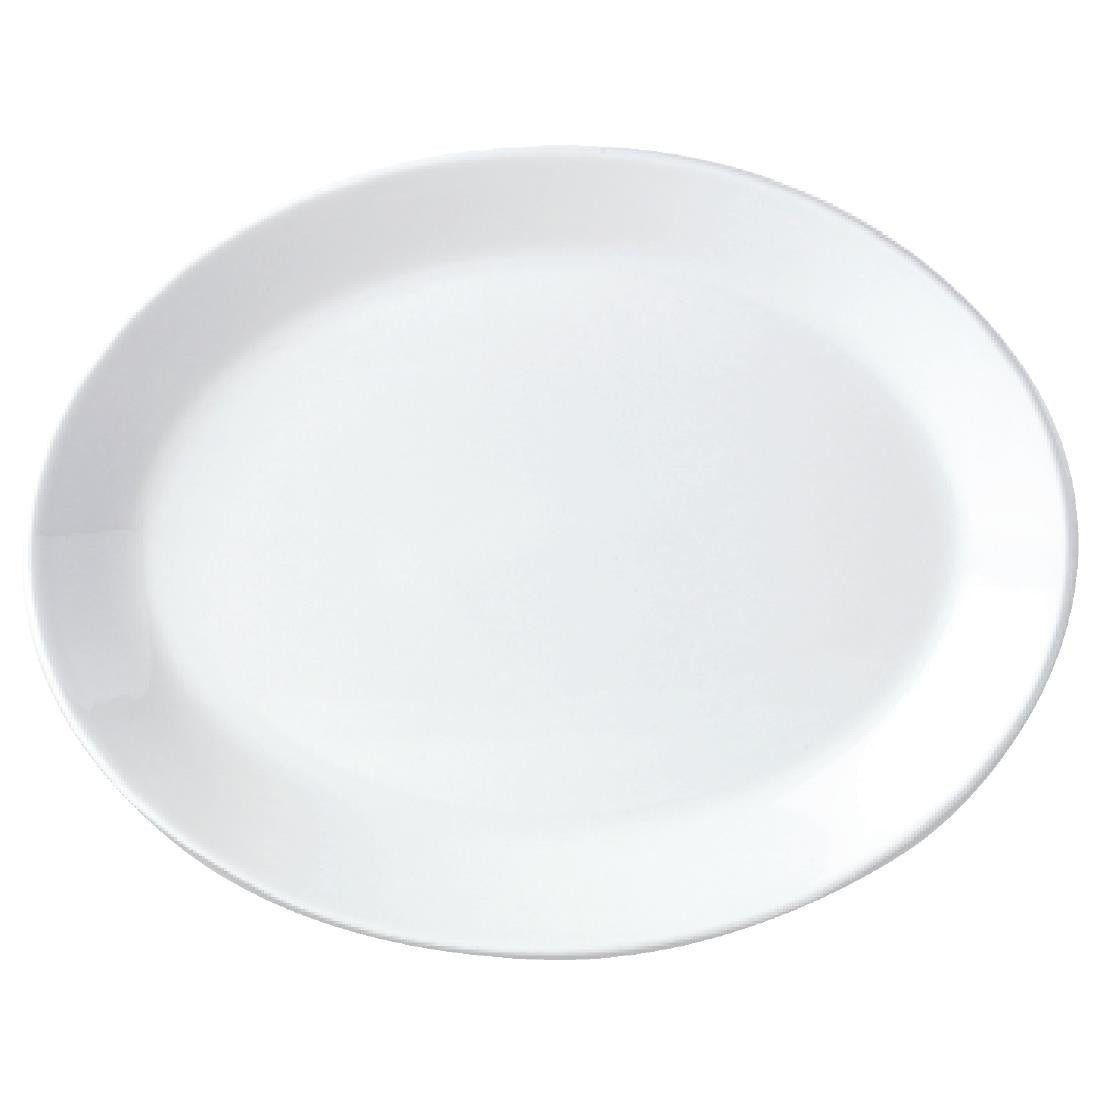 Steelite Simplicity White Oval Coupe Dishes 280mm (Pack of 12)